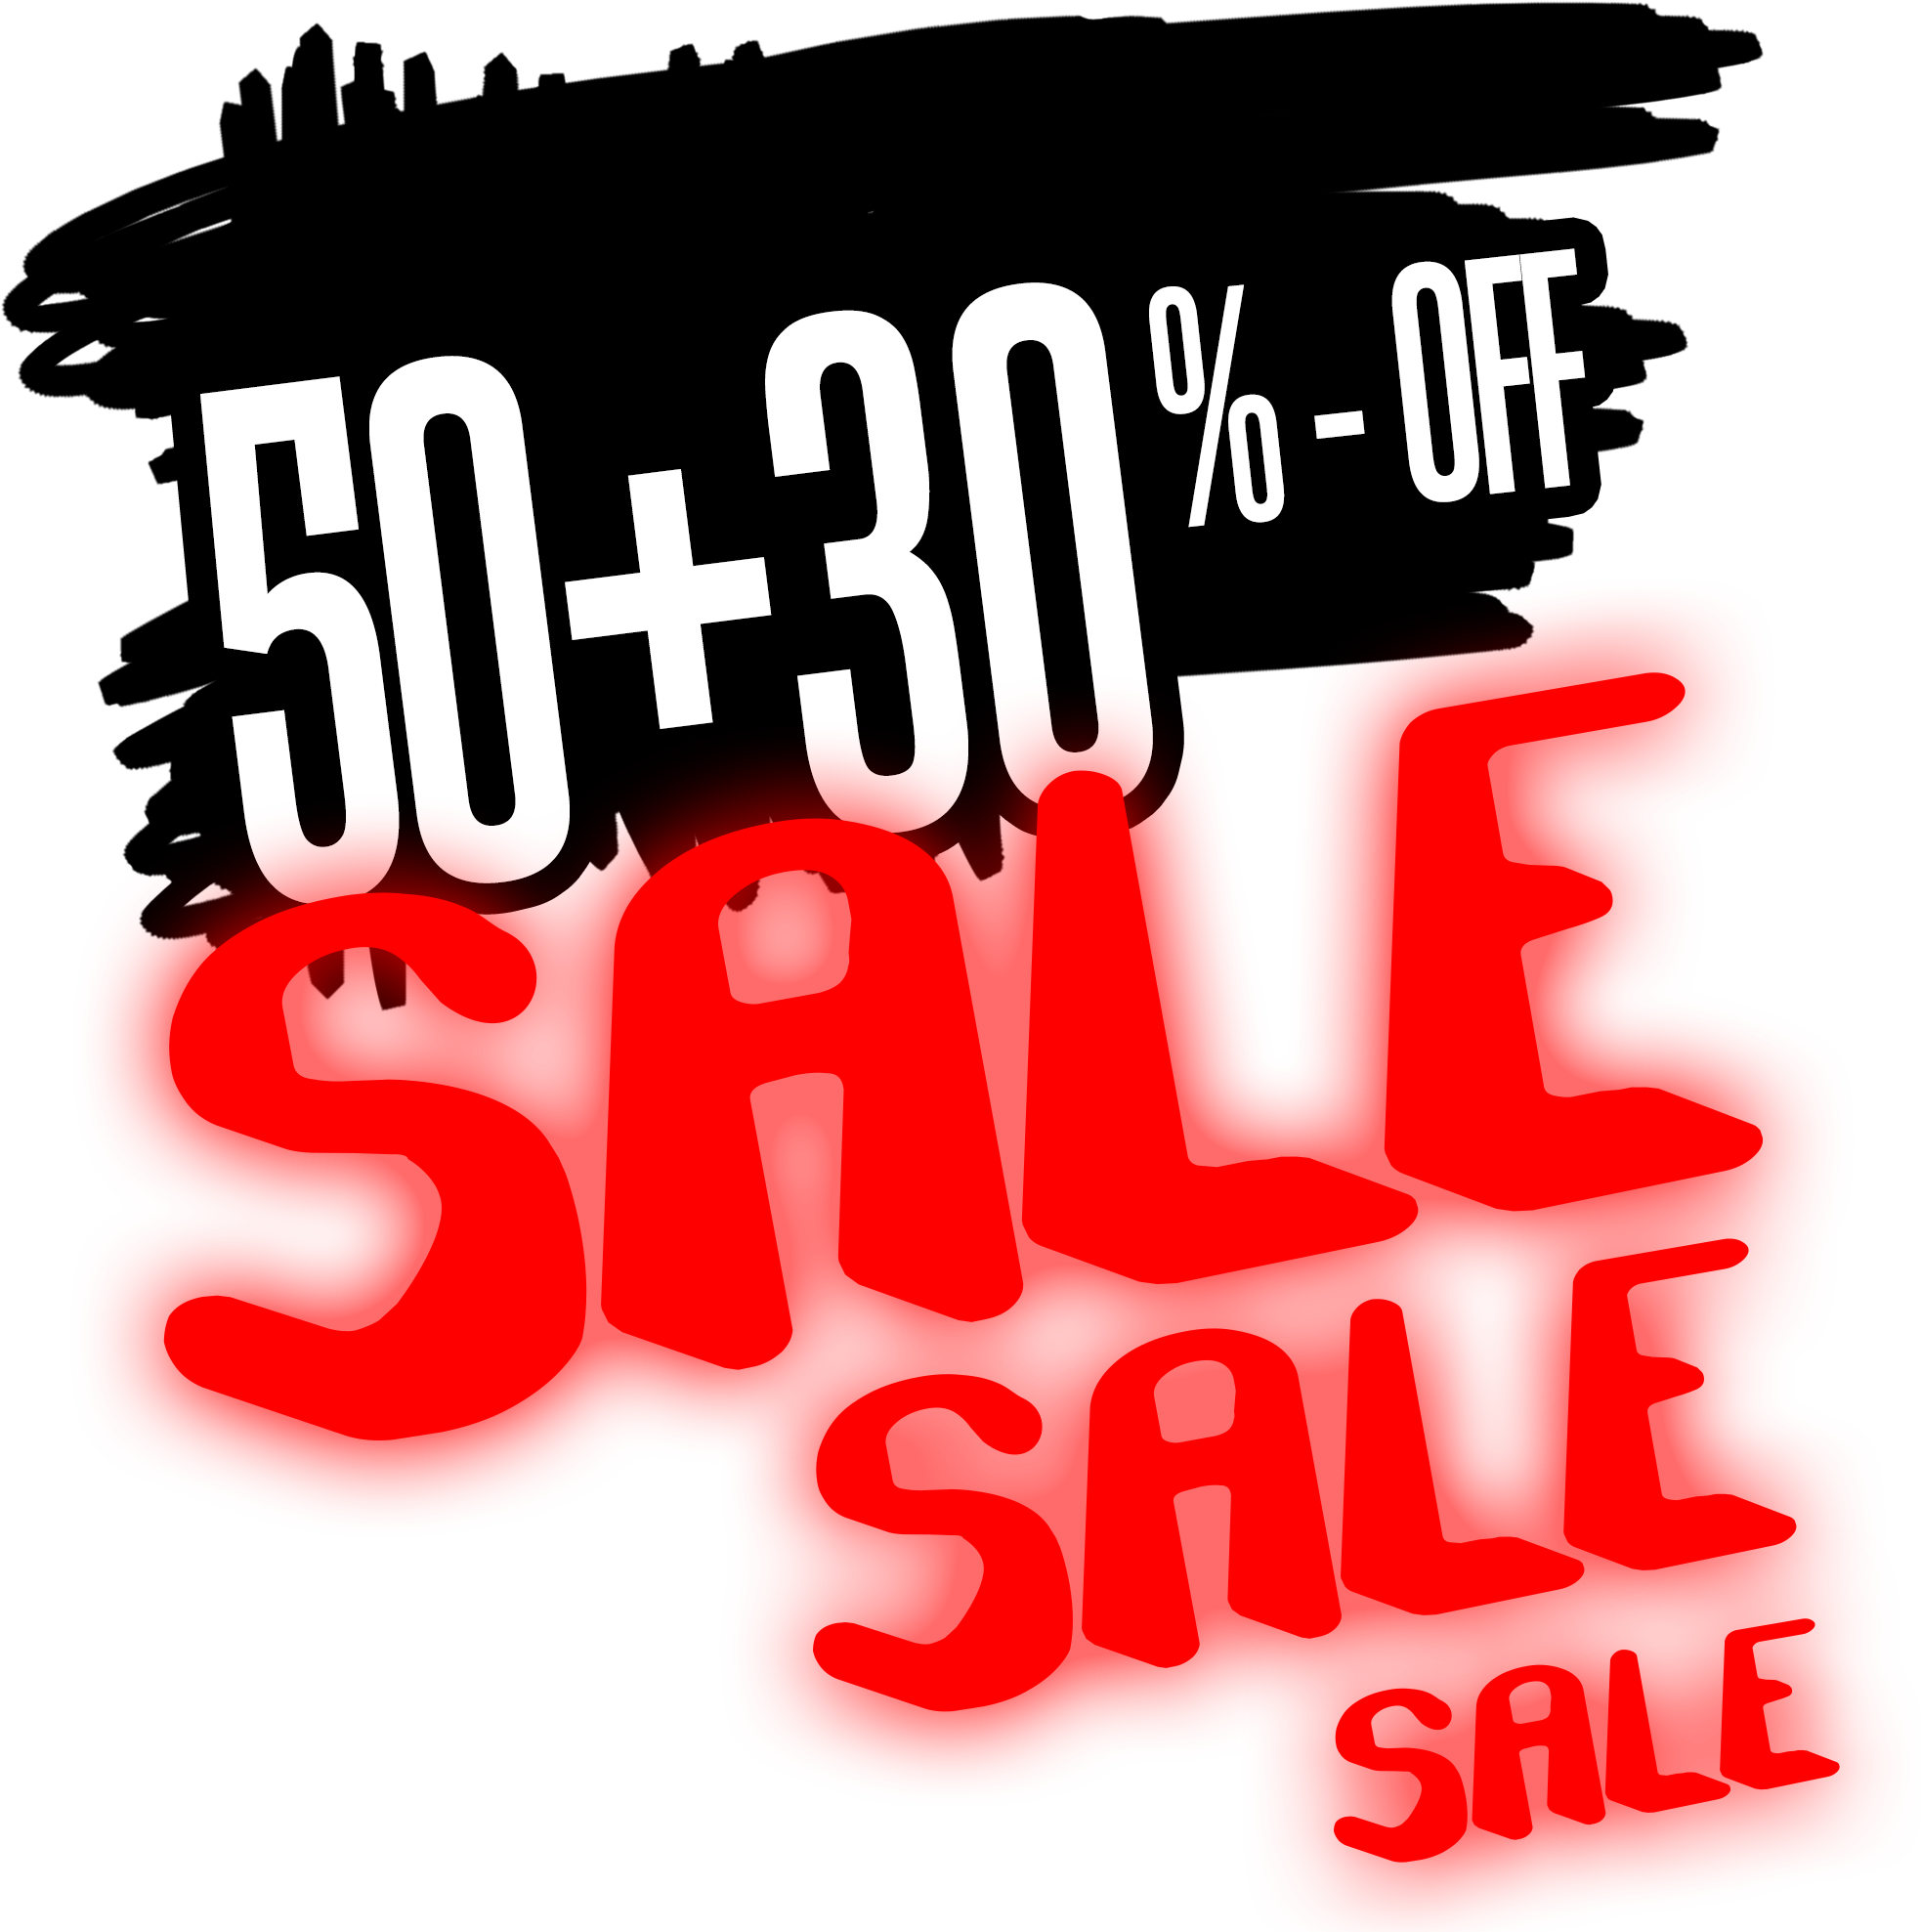 Red Glow 50 Plus 30 Percent Off Png Image - Sale 50 Off Png (2048x2048)